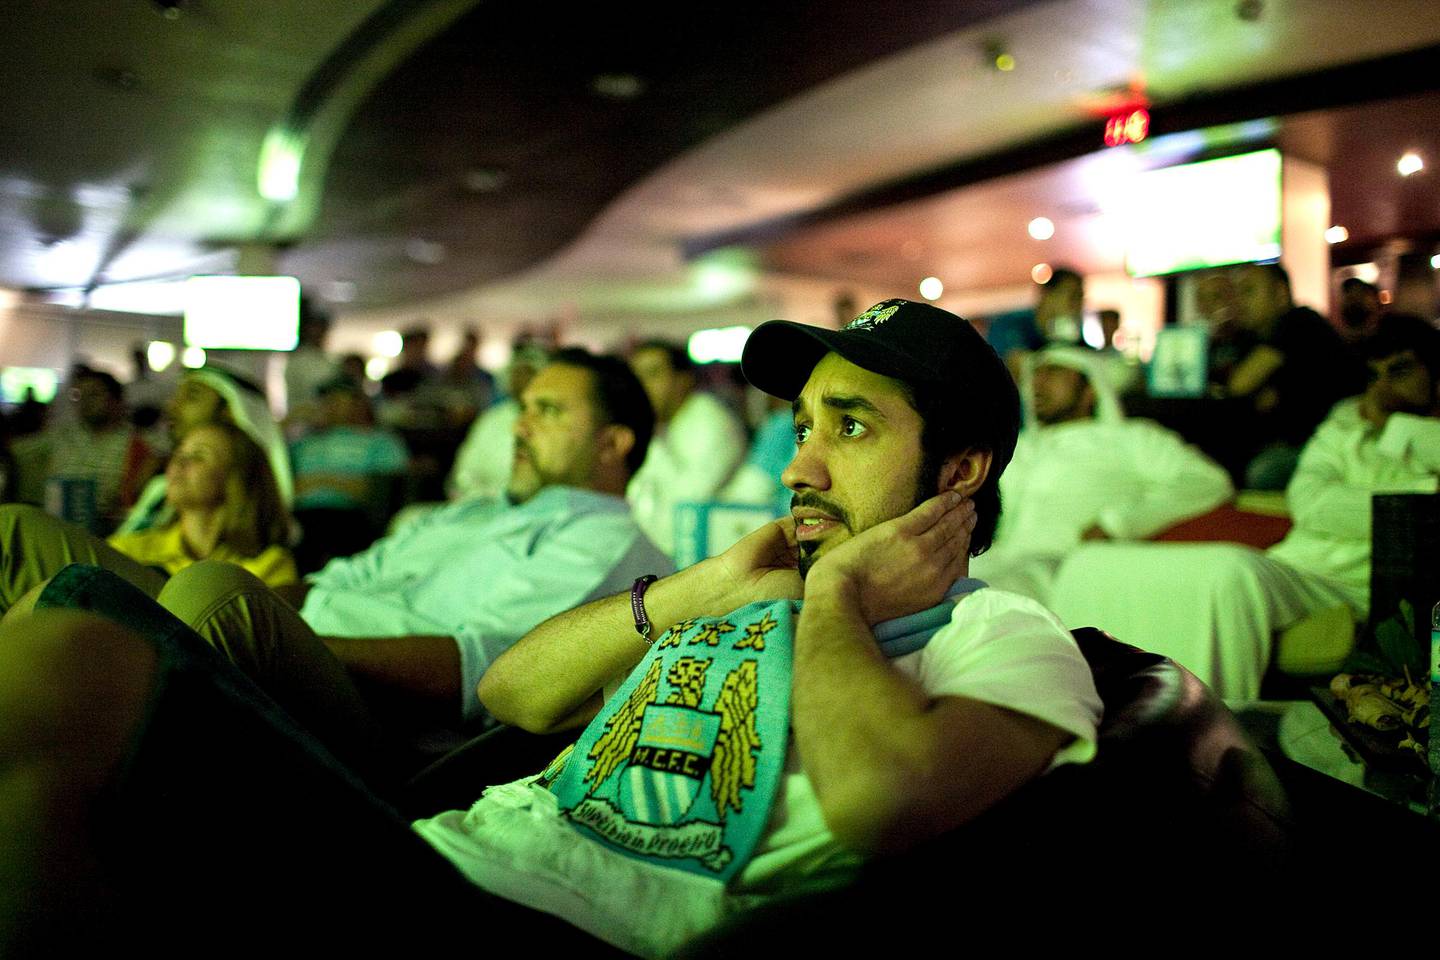  Abu Dhabi, United Arab Emirates, April 30, 2012:   
Othman Said Saif of Al Ain tensely follows the action on a TV screen as he and about hundred other fans gather to watch the Manchester United v Manchester City game on Monday, Apr. 30, 2012, at the Clubhouse at the Zayed Sports City in Abu Dhabi. Manchester City led the game after the fist half with a one-goal victory. (Silvia Razgova / The National)
